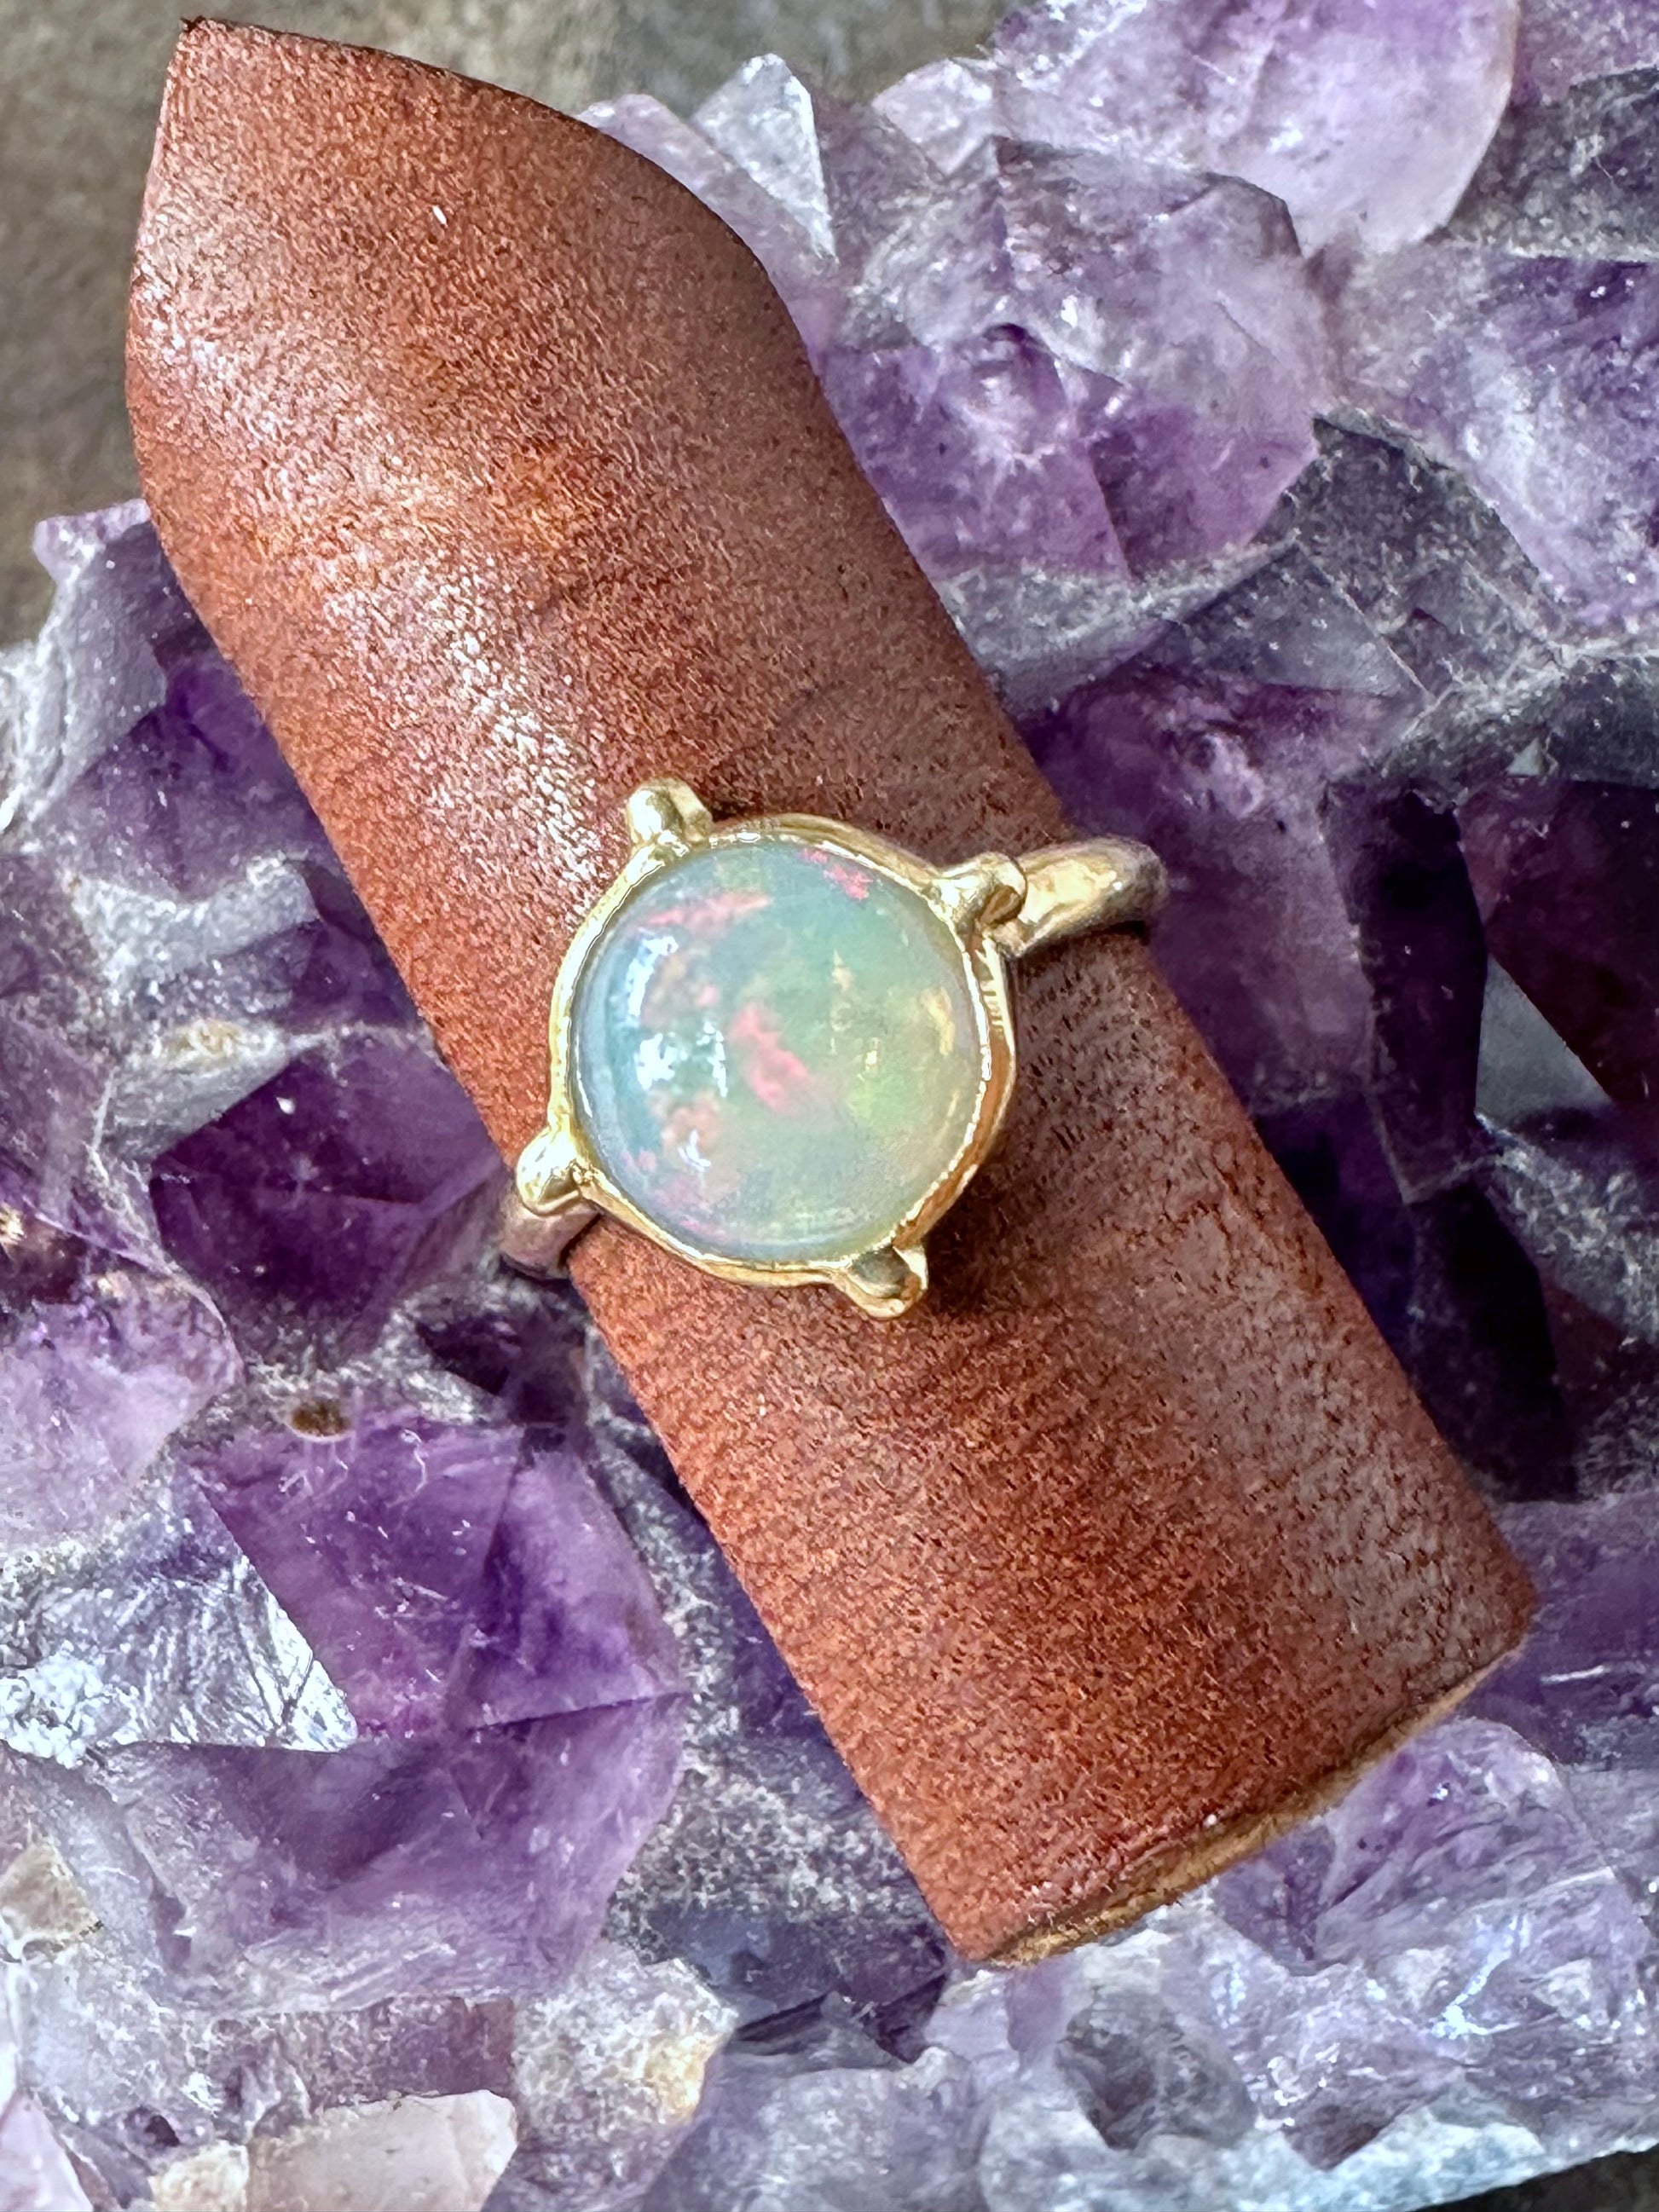 a round opal ring in gold iwth four beads at the four directins is on a piece of brown leather sitting on a piece of amethyst on grey wood